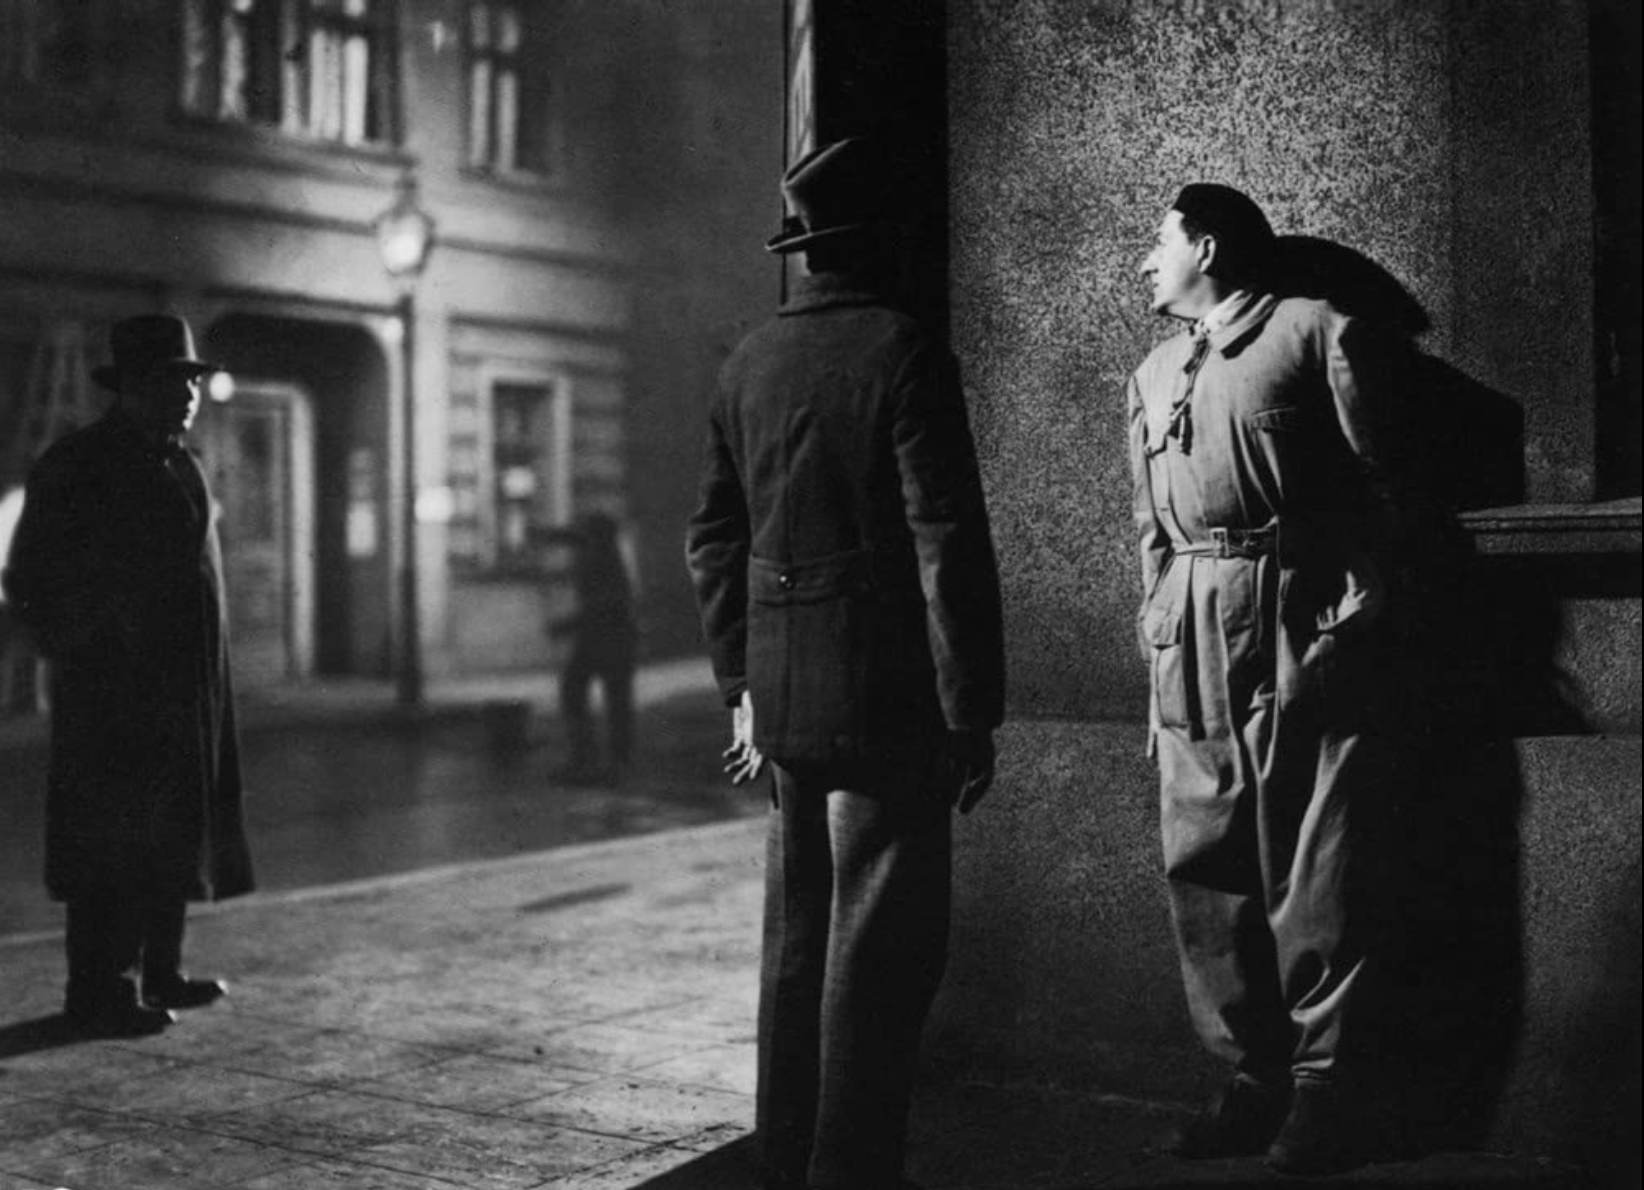 <p><b>Rotten Tomatoes Score:</b> 100%</p><p>M is a groundbreaking German thriller directed by Fritz Lang, released in 1931. The film tells the story of a city gripped by fear as a serial killer preys on young children. What makes M so remarkable is Lang's innovative approach to filmmaking. The film was one of the first to use sound in a creative way, and Lang's use of shadow and light to create a dark and foreboding atmosphere is unparalleled. The film's star, Peter Lorre, delivers a haunting performance as the killer, conveying a chilling sense of desperation and psychosis. M has since become a seminal work of German cinema and is widely regarded as a classic of the thriller genre. </p><p><b>Critics said</b>: “<i>A landmark psychological thriller with arresting images, deep thoughts on modern society, and Peter Lorre in his finest performance.”  <a href="https://www.rottentomatoes.com/m/1012928-m/reviews?intcmp=rt-scorecard_tomatometer-reviews">RT</a></i></p>